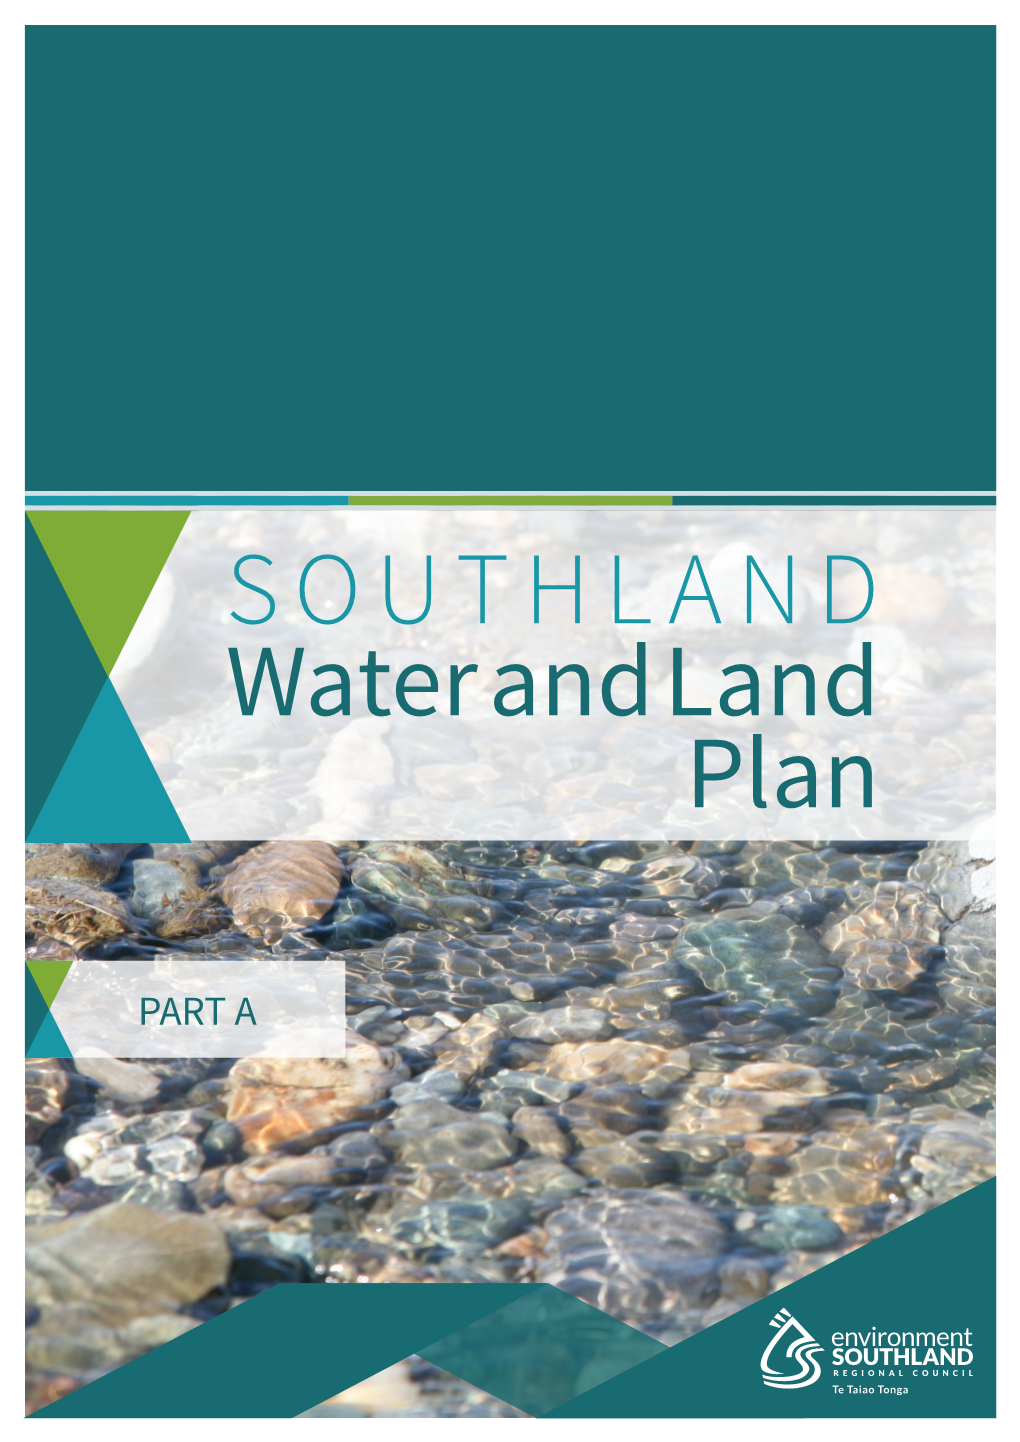 Proposed Southland Water and Land Plan Part A